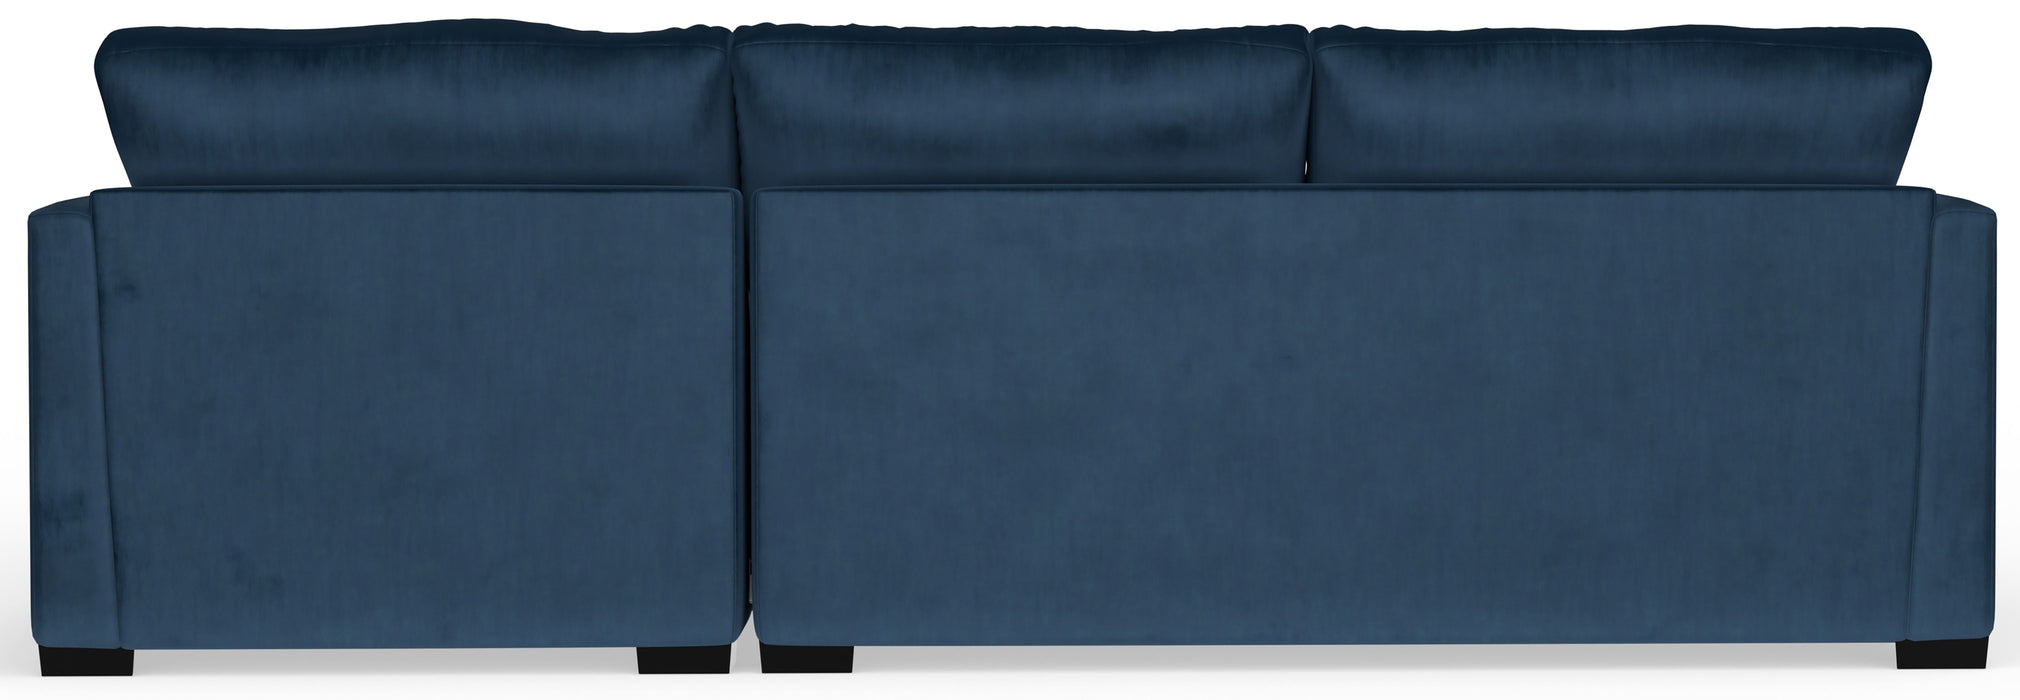 Jetson - 2 Piece Sofa / RSF Chaise With Comfort Coil Seat Cushions And 4 Included Accent Pillows - Nile